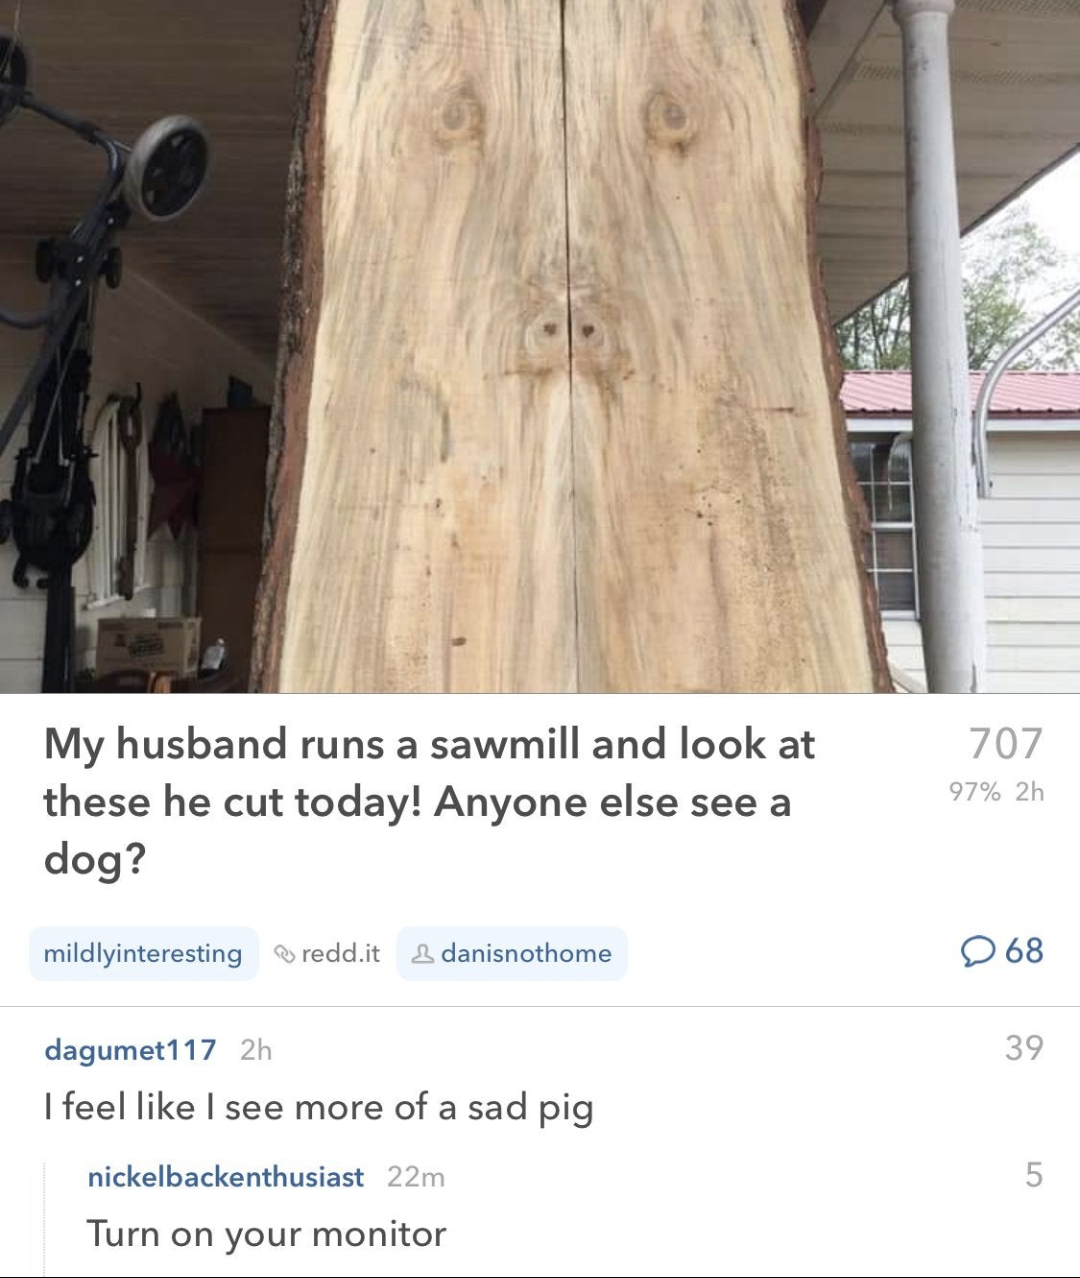 My husband runs a sawmill and look at these he cut today! Anyone else see a dog? 707 97% 2h mildlyinteresting redd.it danisnothome 68 dagumet 117 2h I feel I see more of a sad pig nickelbackenthusiast 22m Turn on your monitor